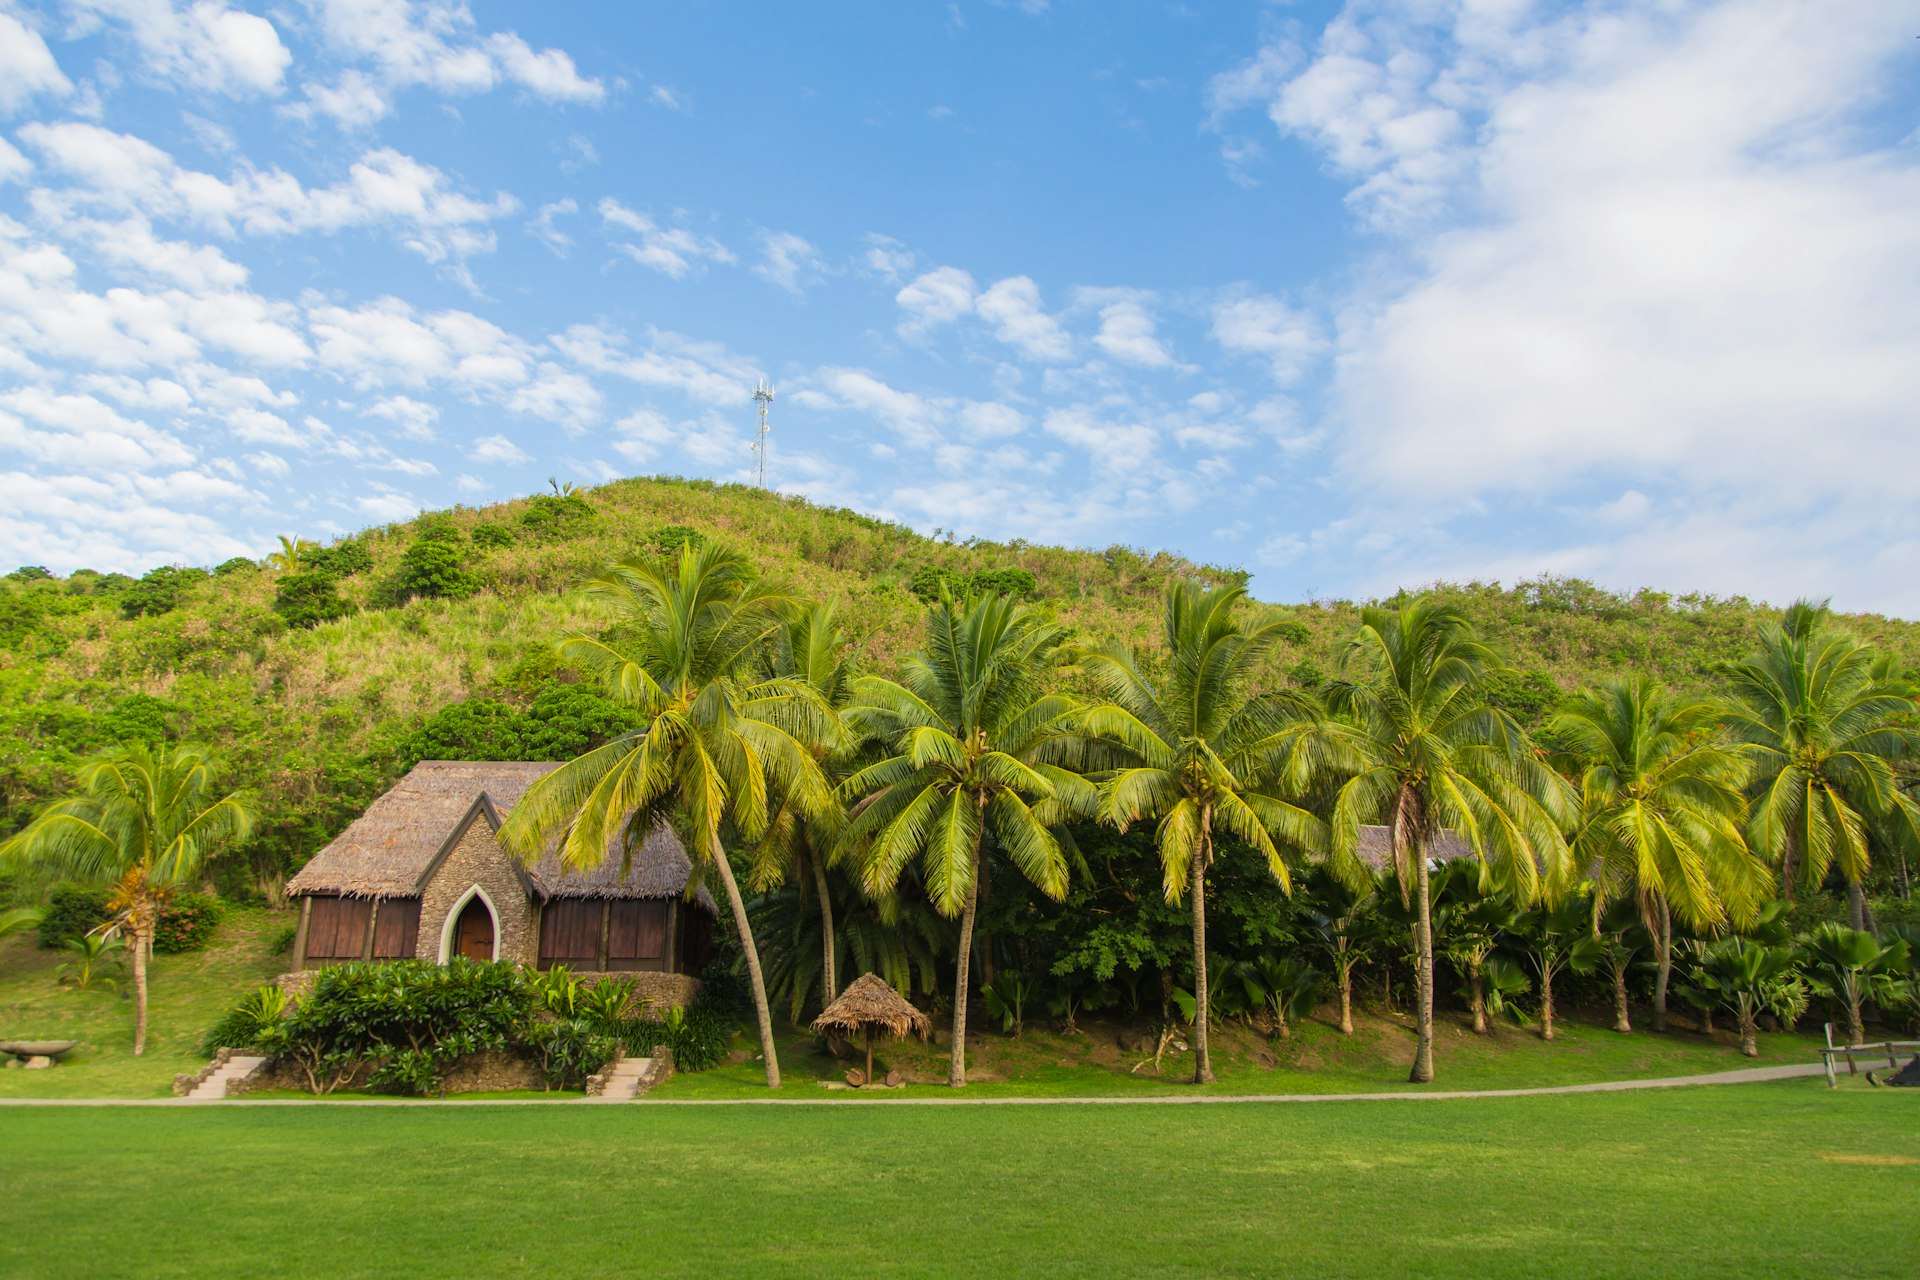 Local church in Fiji surrounded by lush green landscape